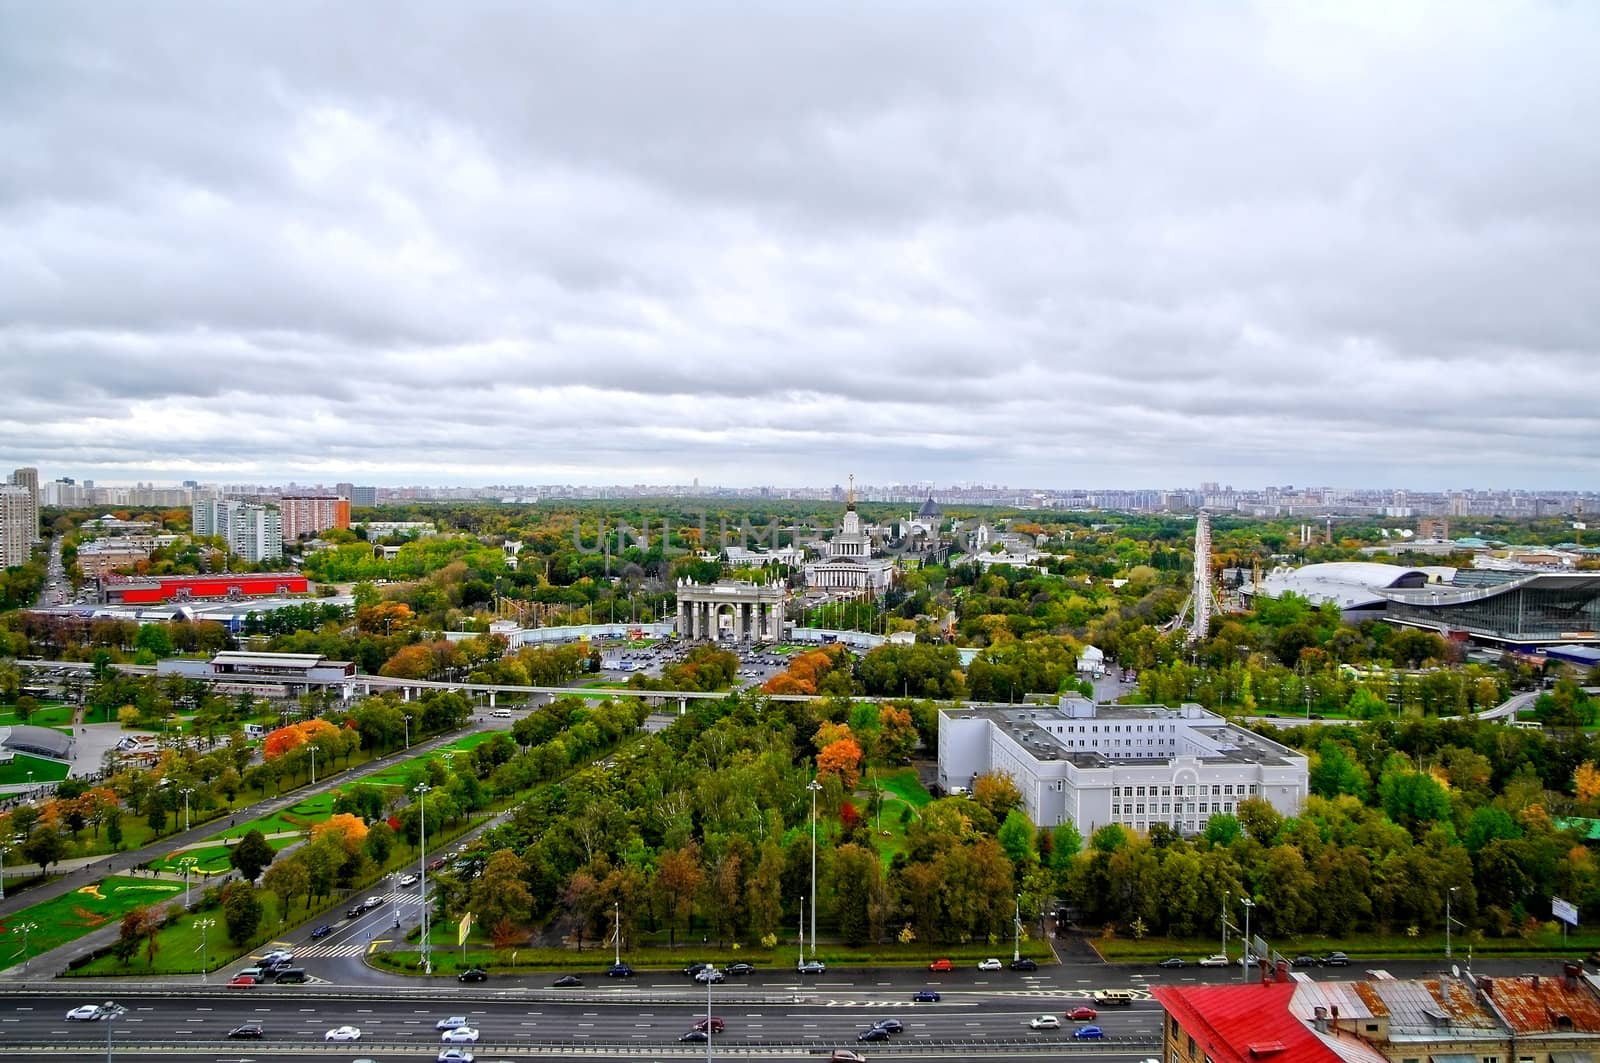 Panorama of All-Russia Exhibition Centre in Moscow, Russia by Stoyanov